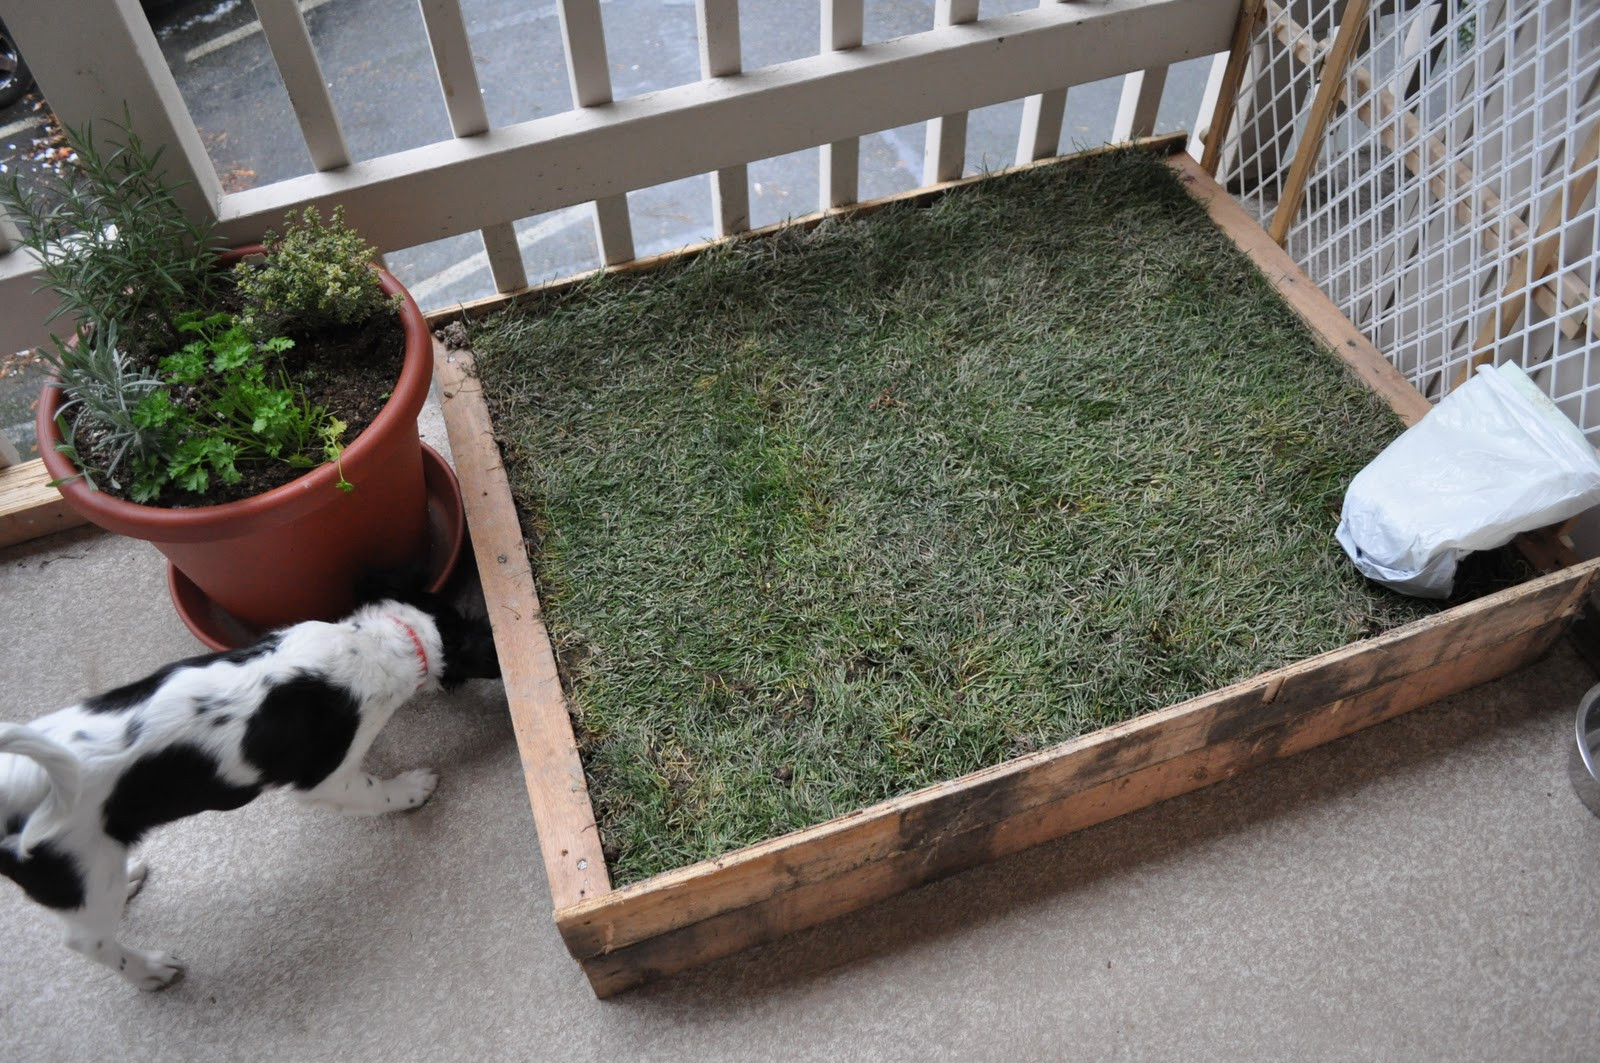 DIY Dog Grass Box
 Instead of walking their dog these people just let it shit